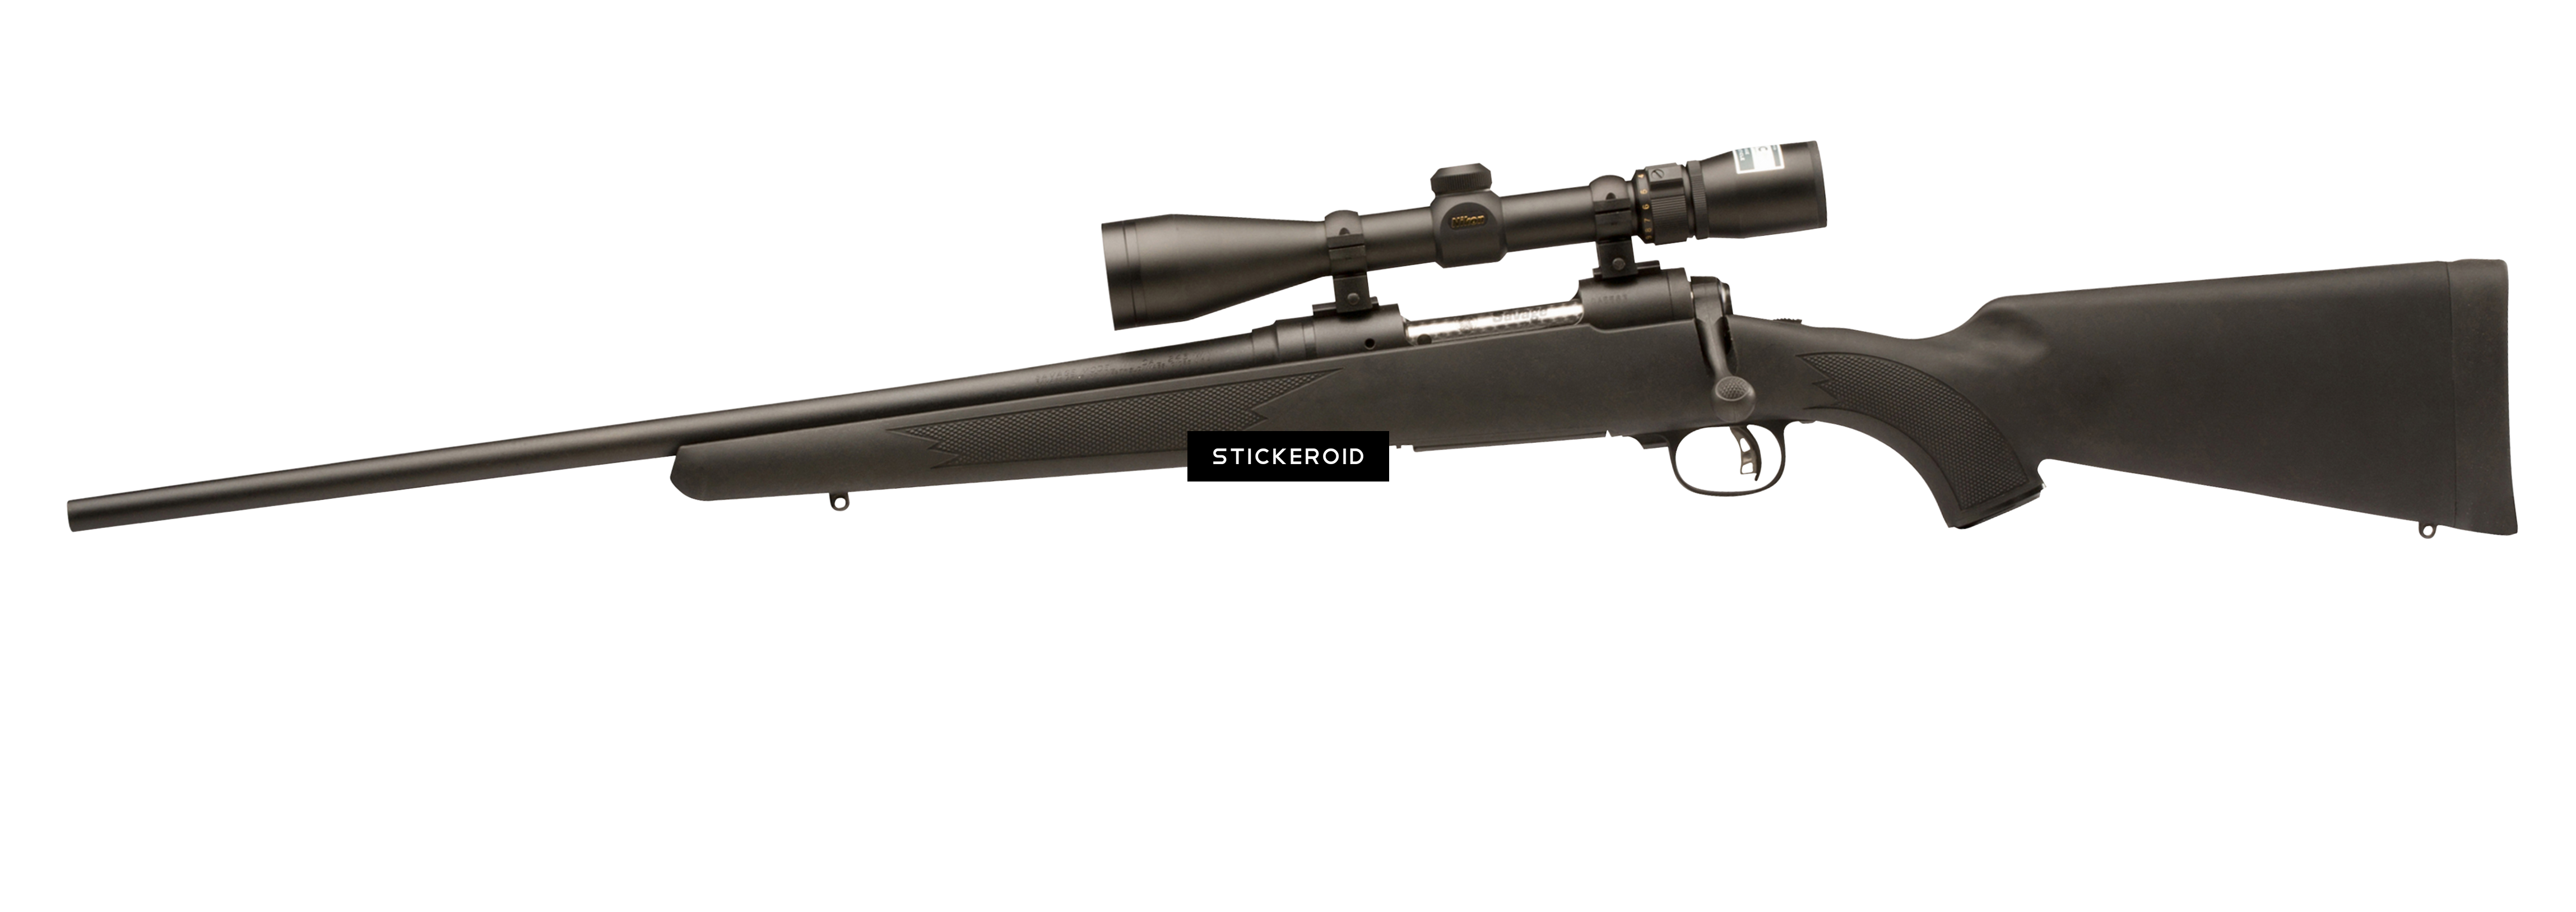 Download PNG image - Sniper Rifle PNG 